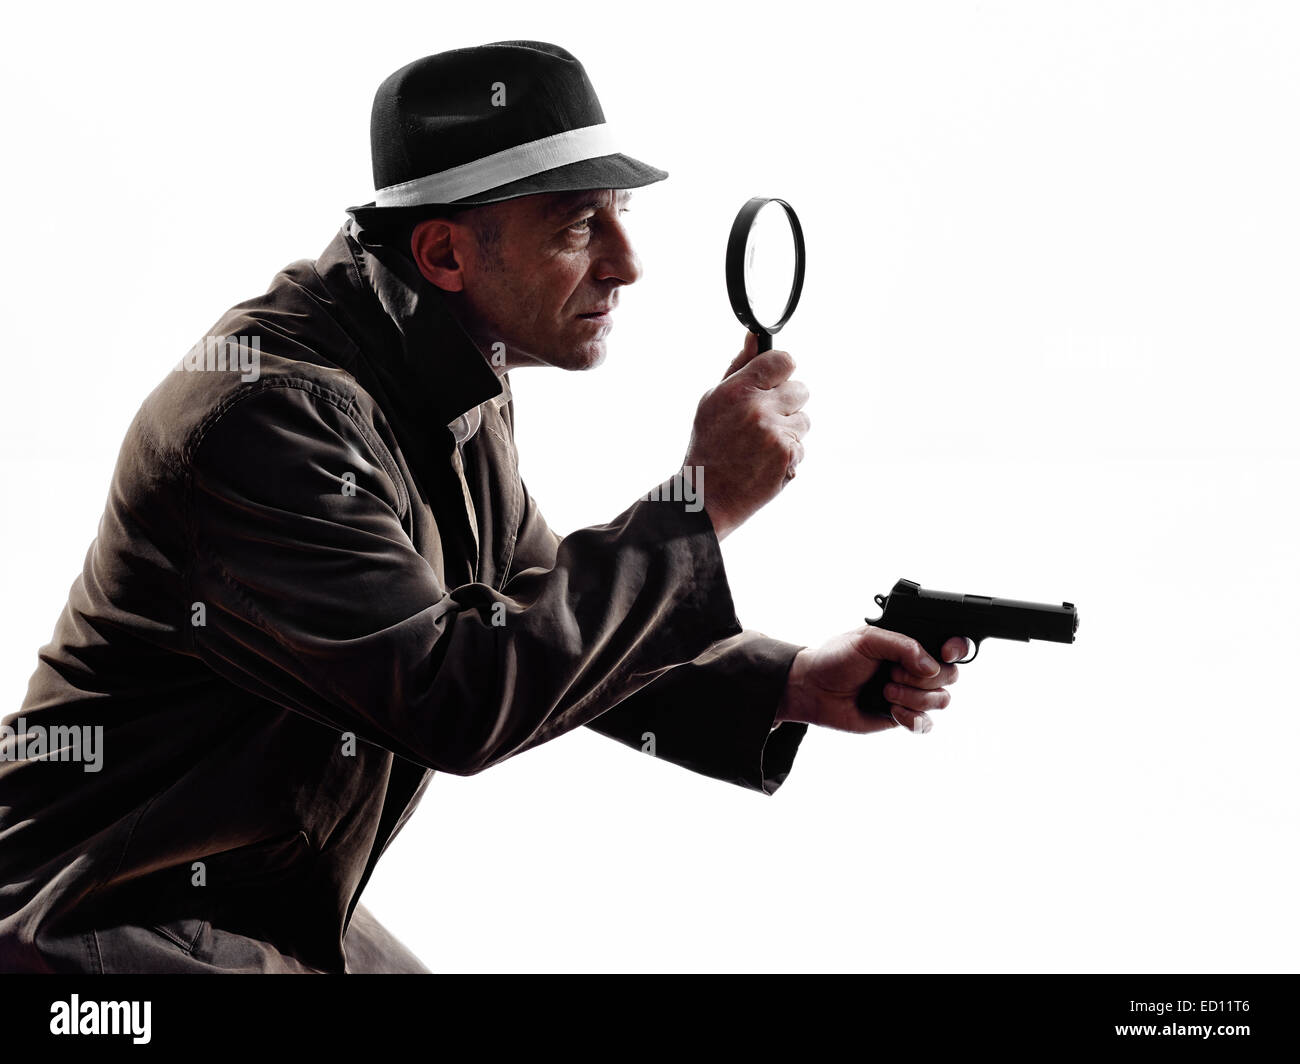 one detective man criminal investigations investigating crime in silhouette on white background Stock Photo